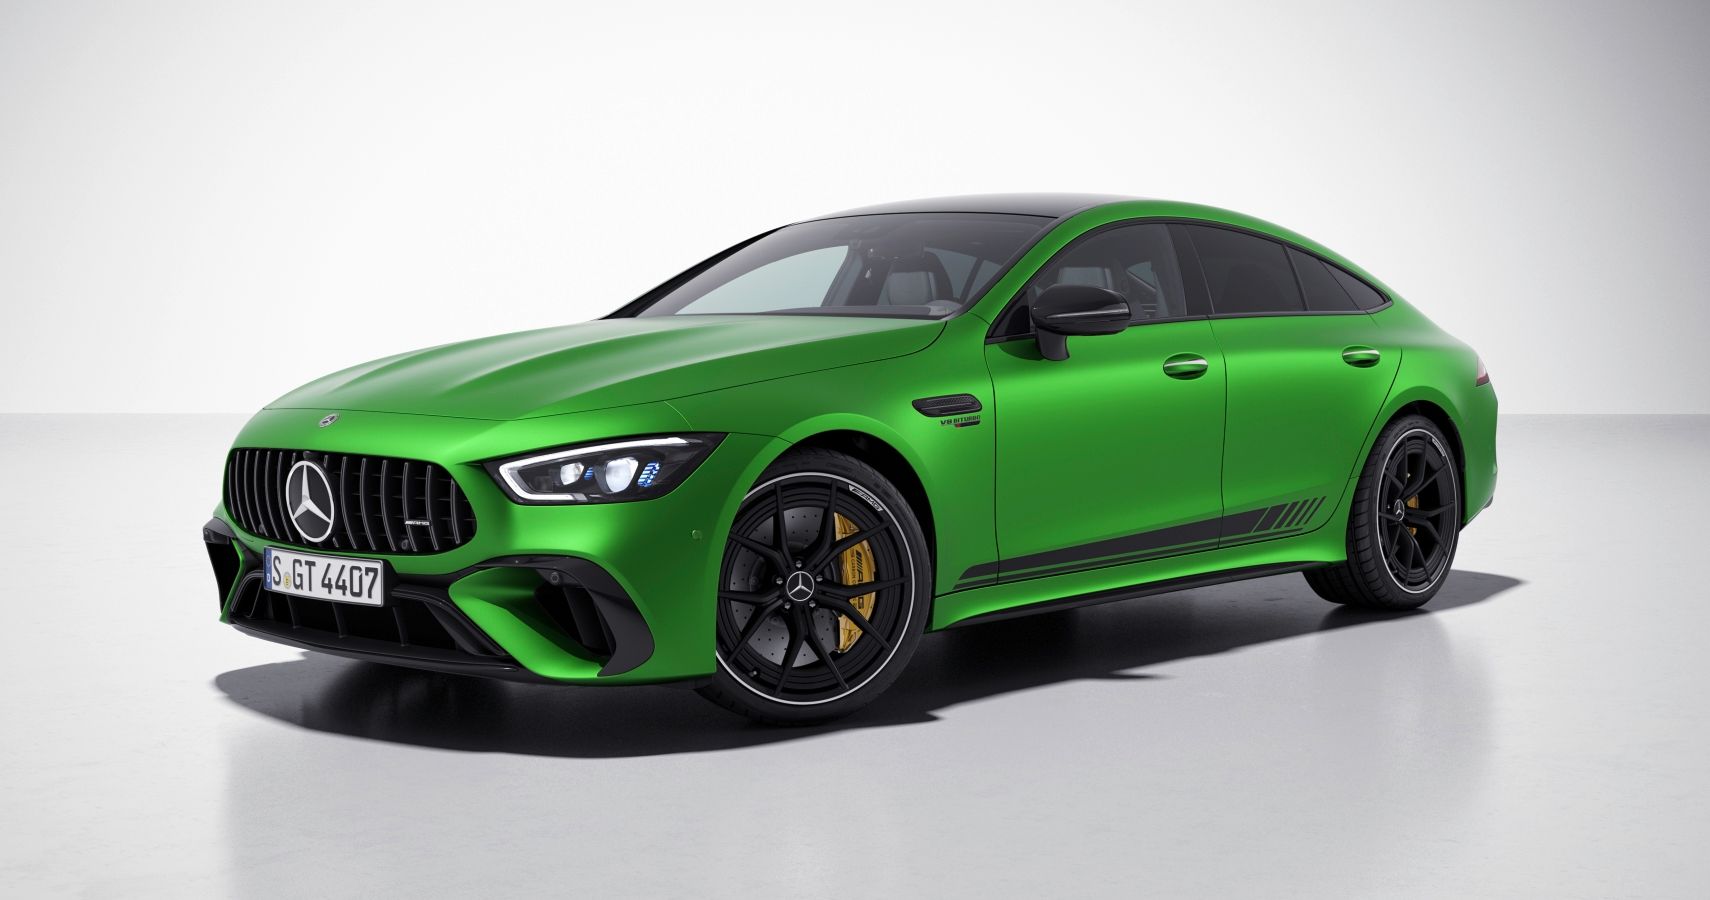 Mercedes-AMG GT 63 S E PERFORMANCE Featured Image